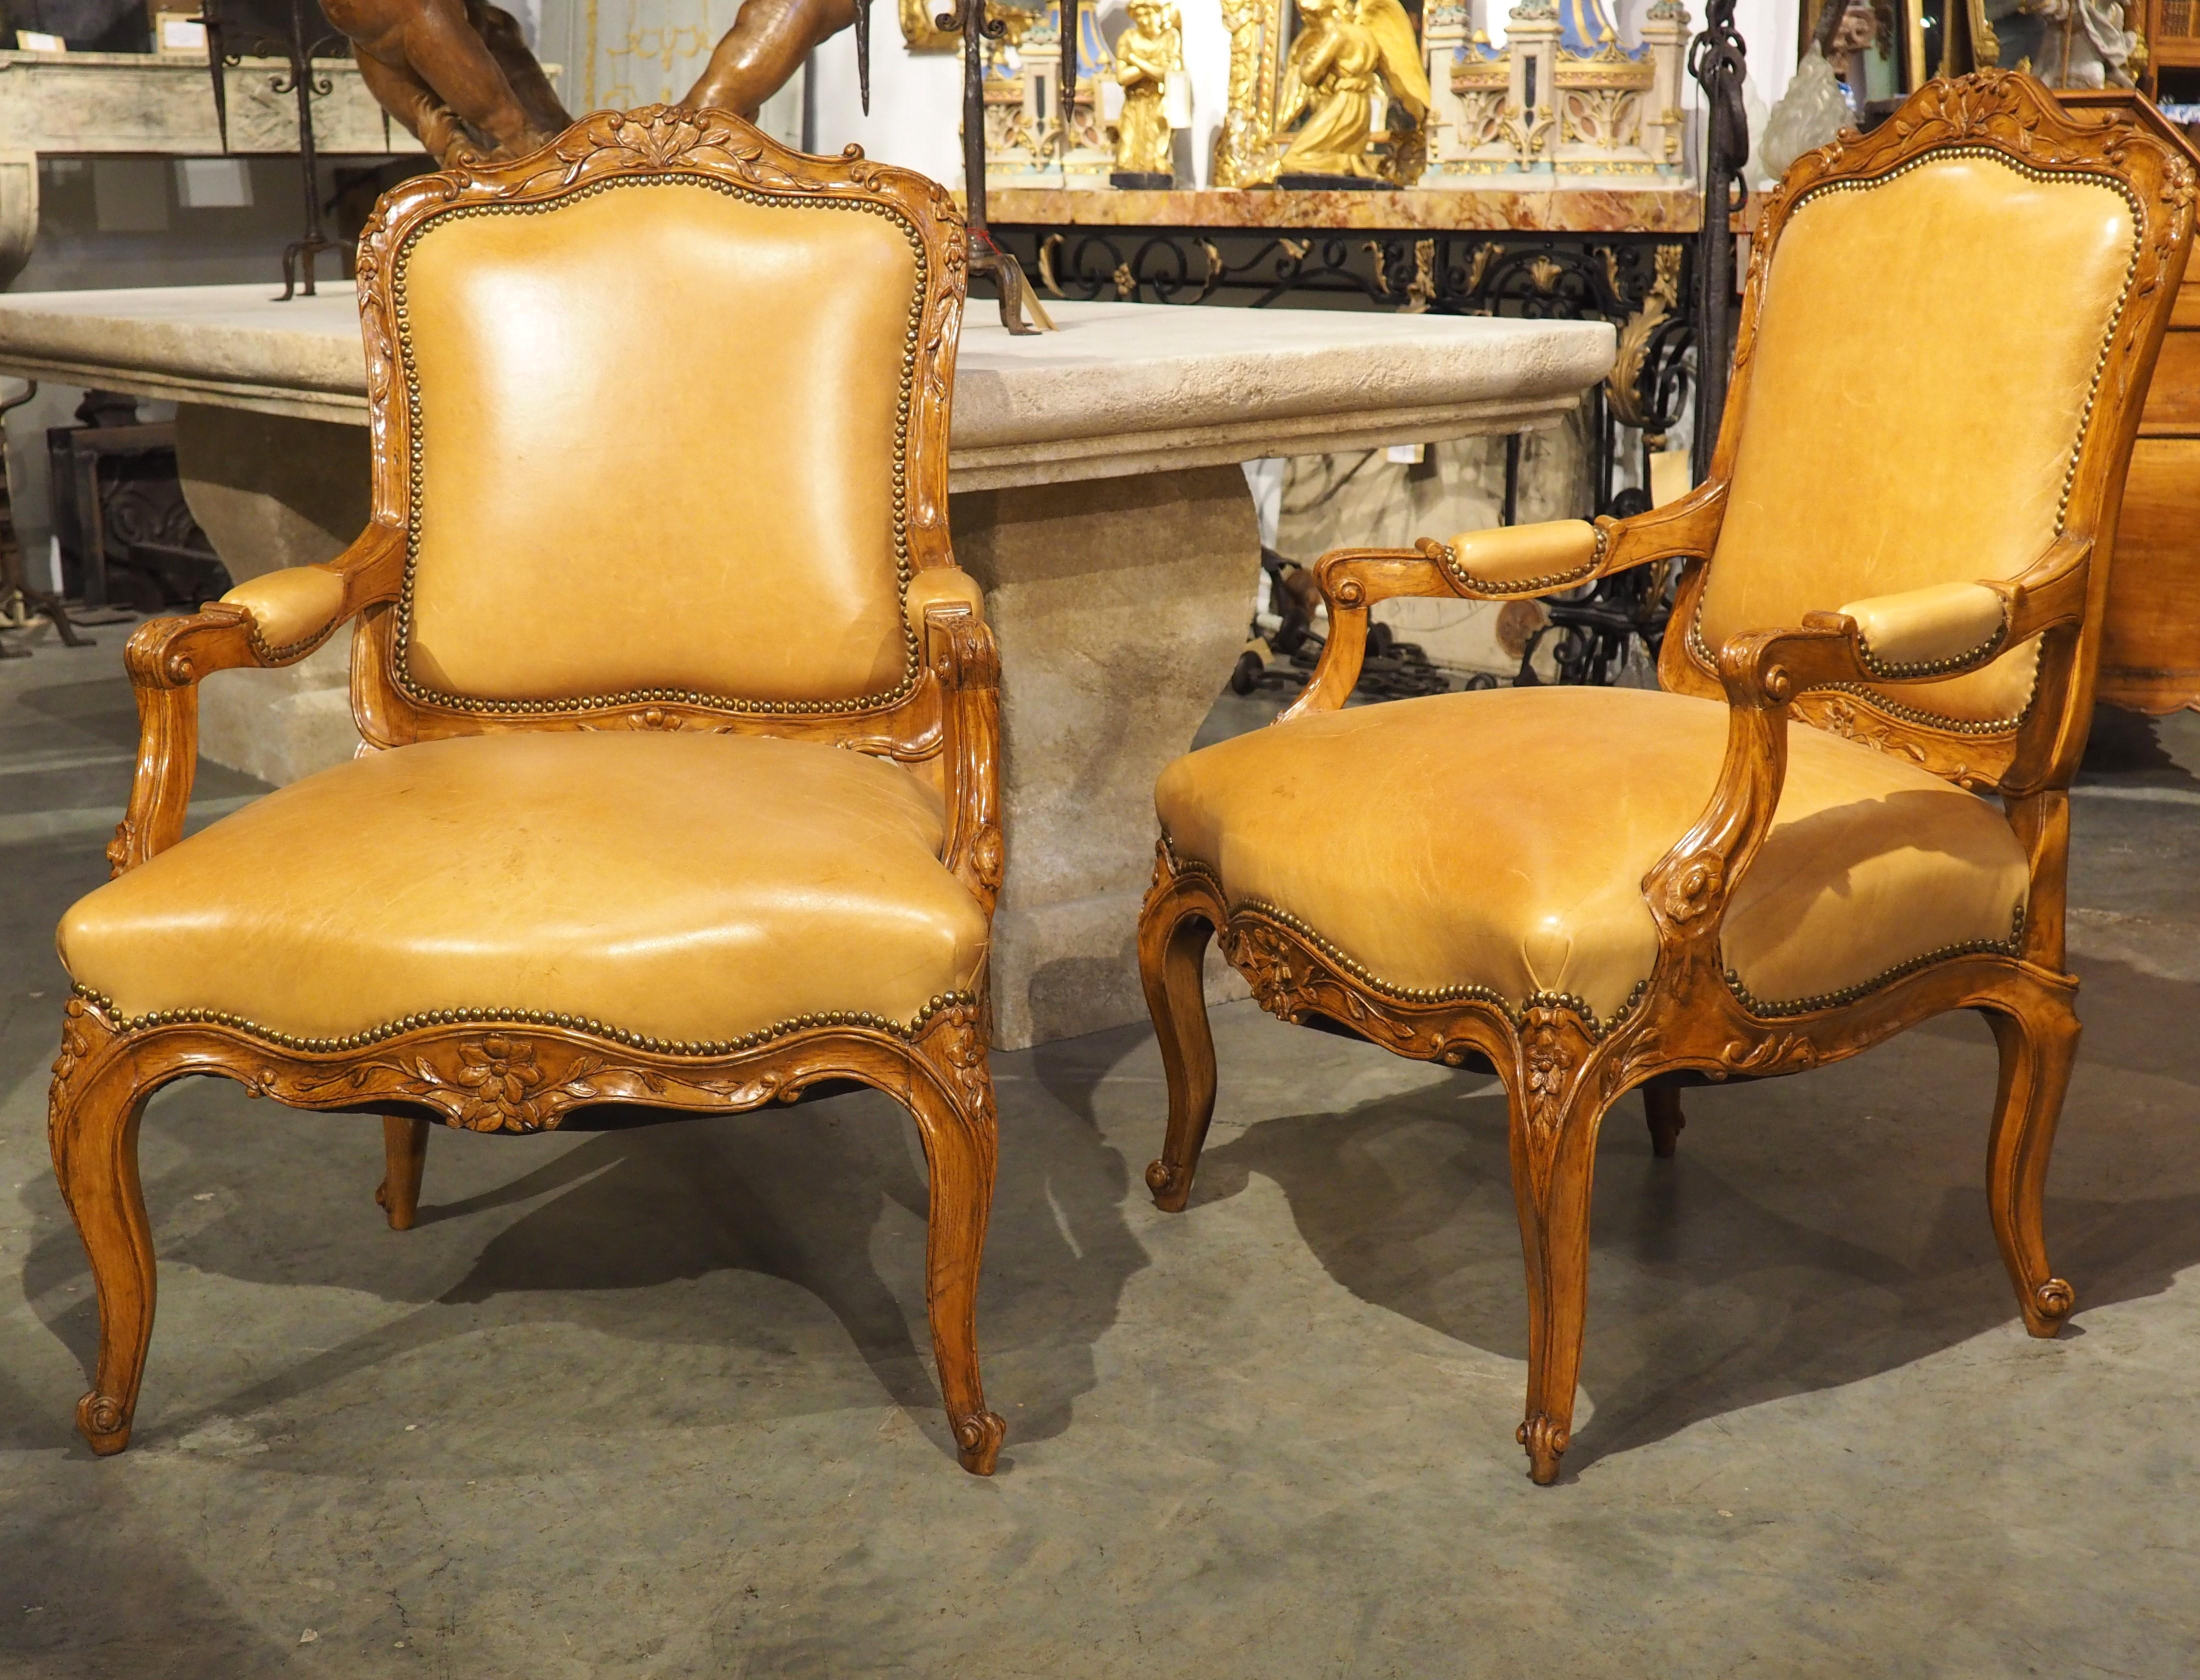 Pair of French Carved Regence Style Armchairs with Leather Upholstery, C. 1900 For Sale 12